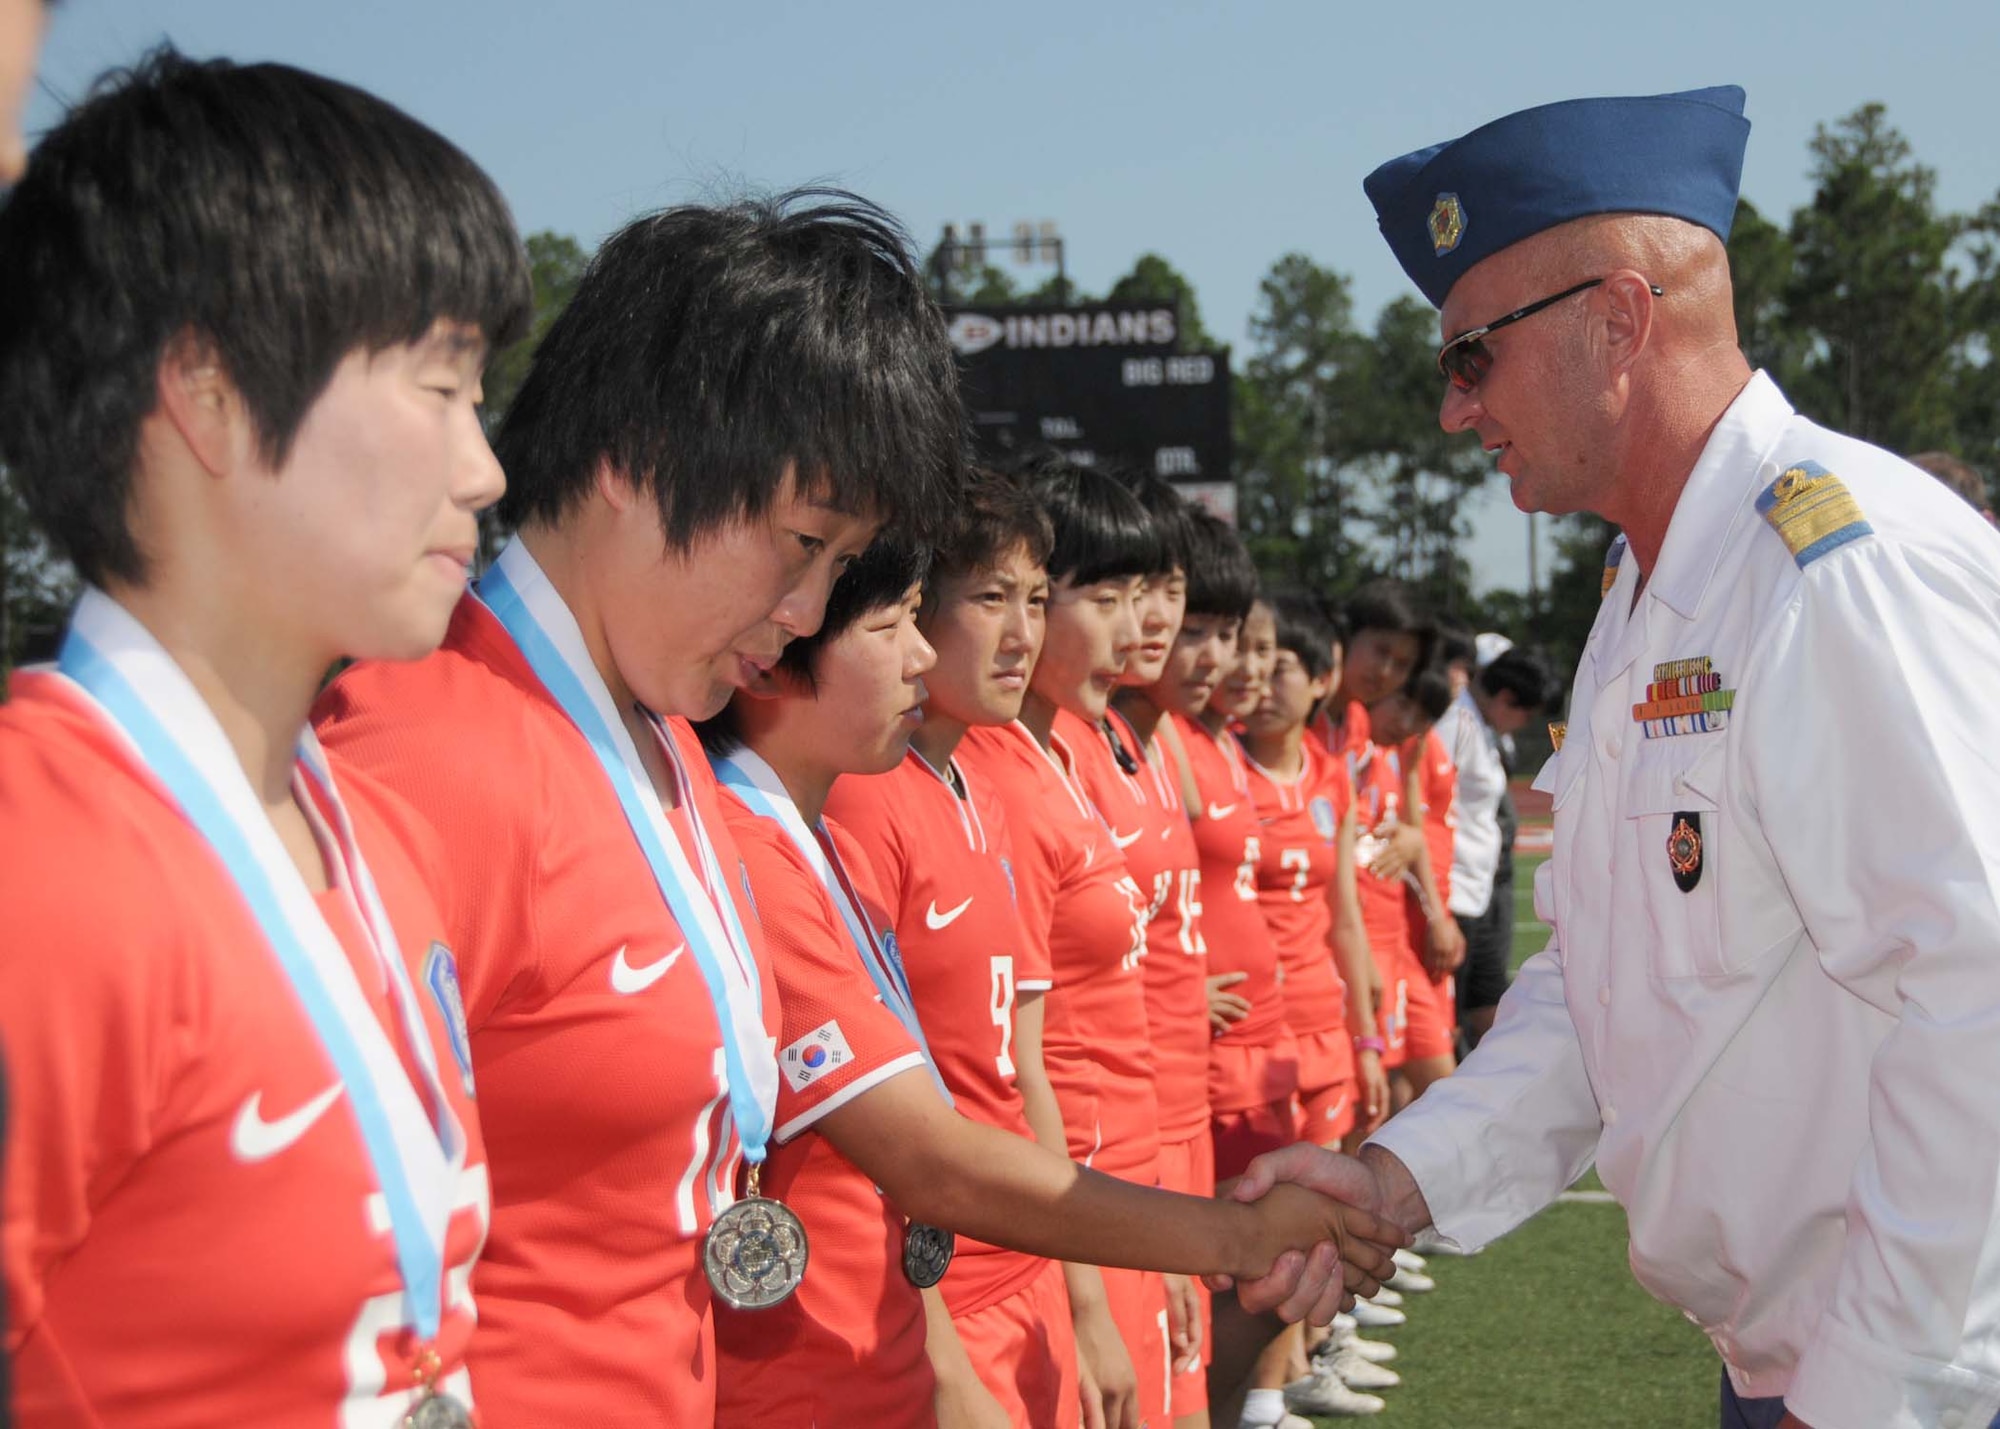 Col. Stefan Marginean of Romania, member of the Conseil International du Sport Militaire board of directors and official CISM representative, presents the CISM silver medal to the seconc-place team from the Republic of South Korea at the closing ceremonies of the 5th CISM Women’s Soccer Championship at the Biloxi High Stadium, June 13.  Brazil earned the gold medal and The Netherlands took the bronze medal.  The CISM tournament, hosted by Keesler Air Force Base, also included teams from France, Canada, Germany and the United States.  (U.S. Air Force photo by Kemberly Groue)